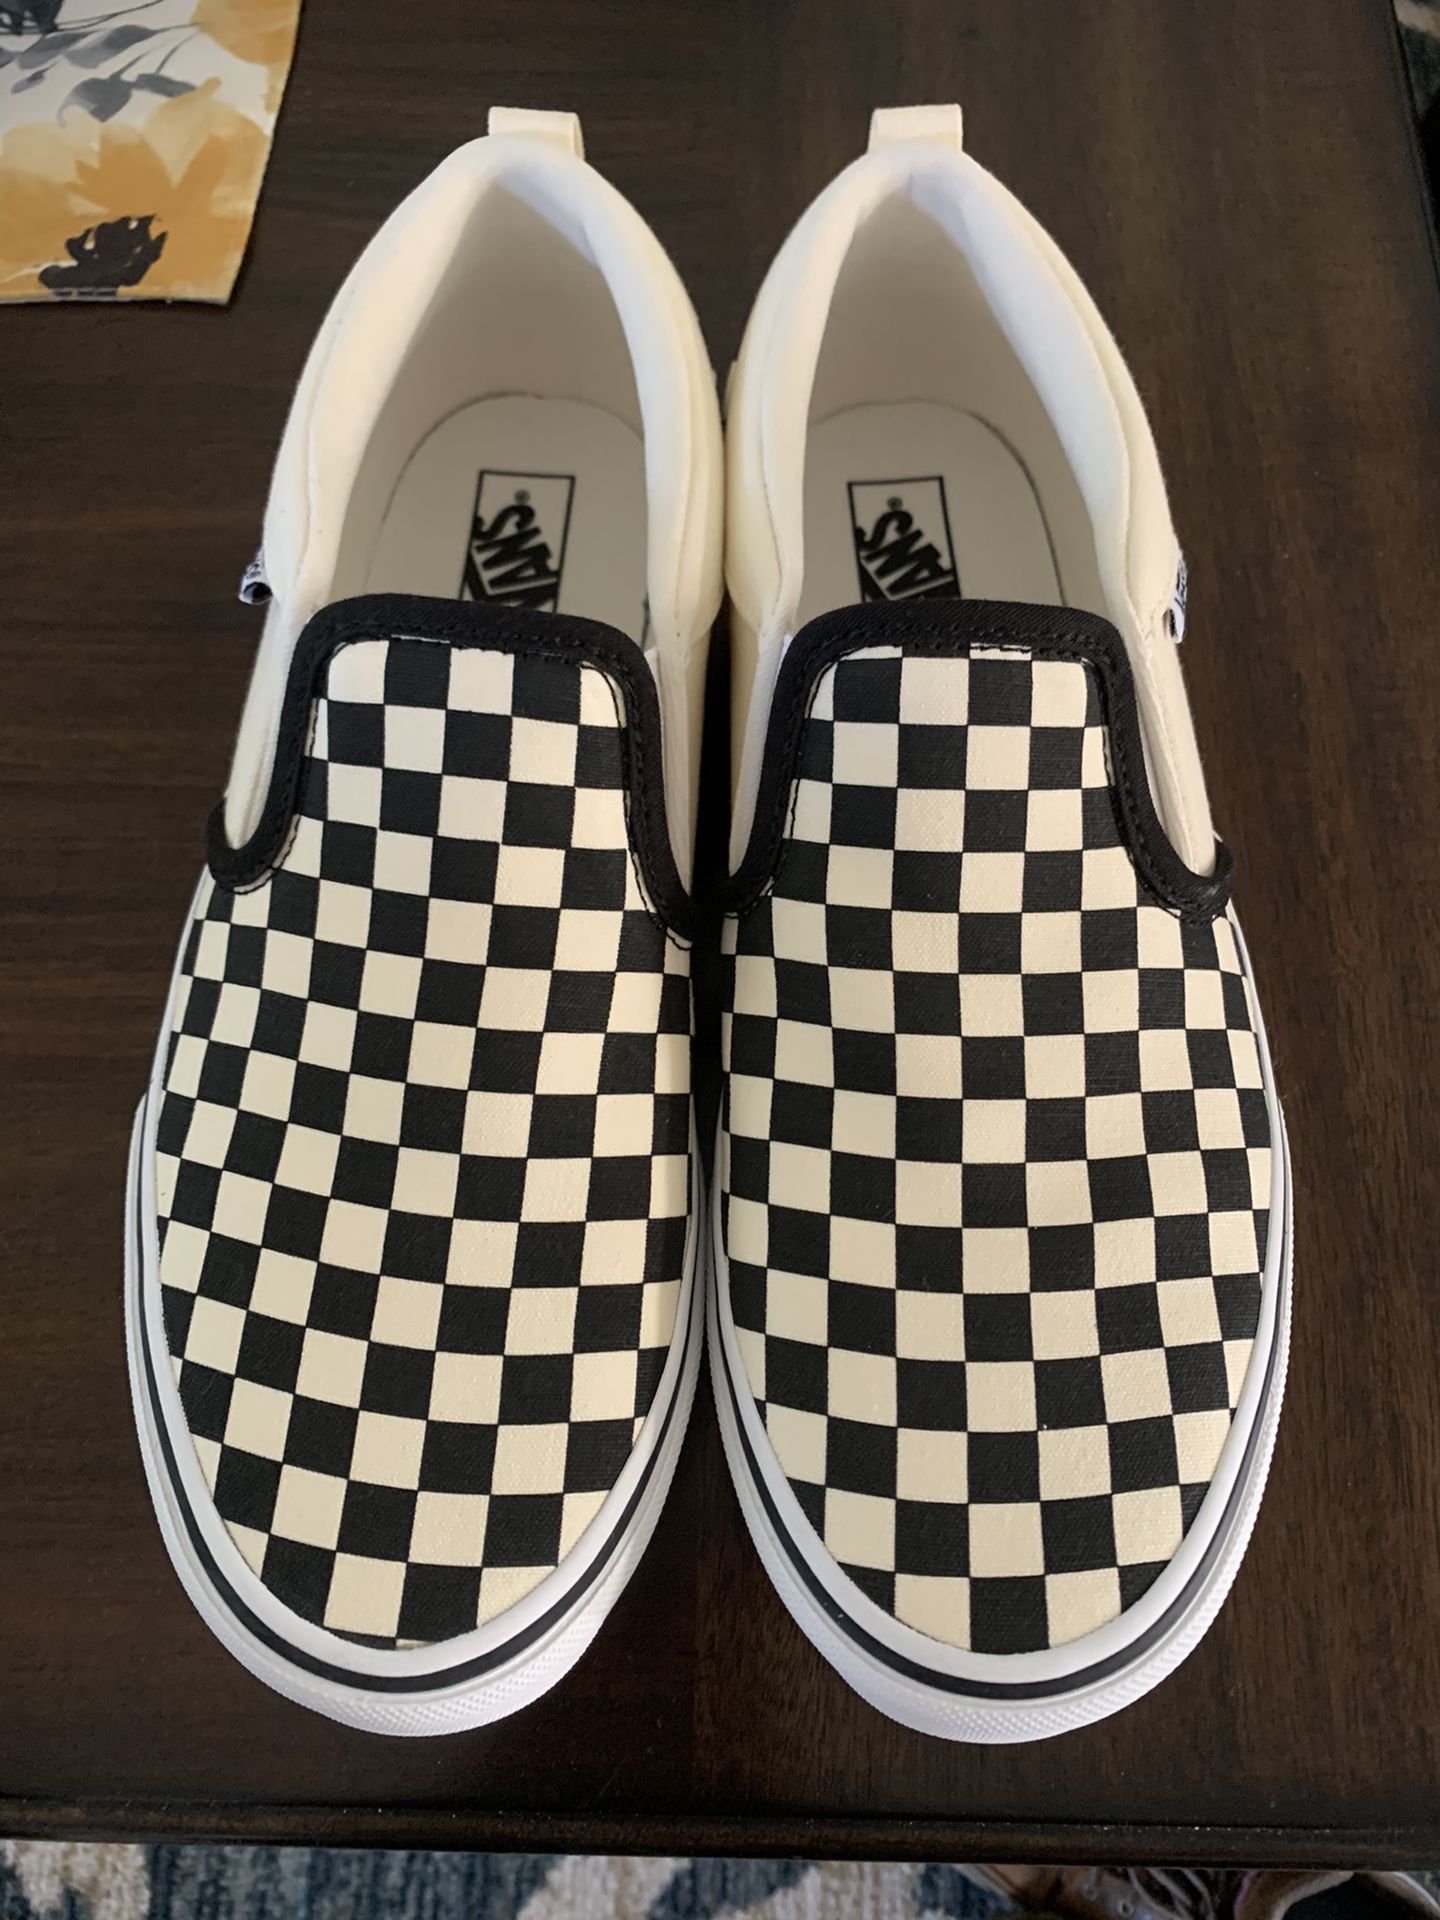 Vans Asher Checked Slip-On Shoe Kids size 7Y